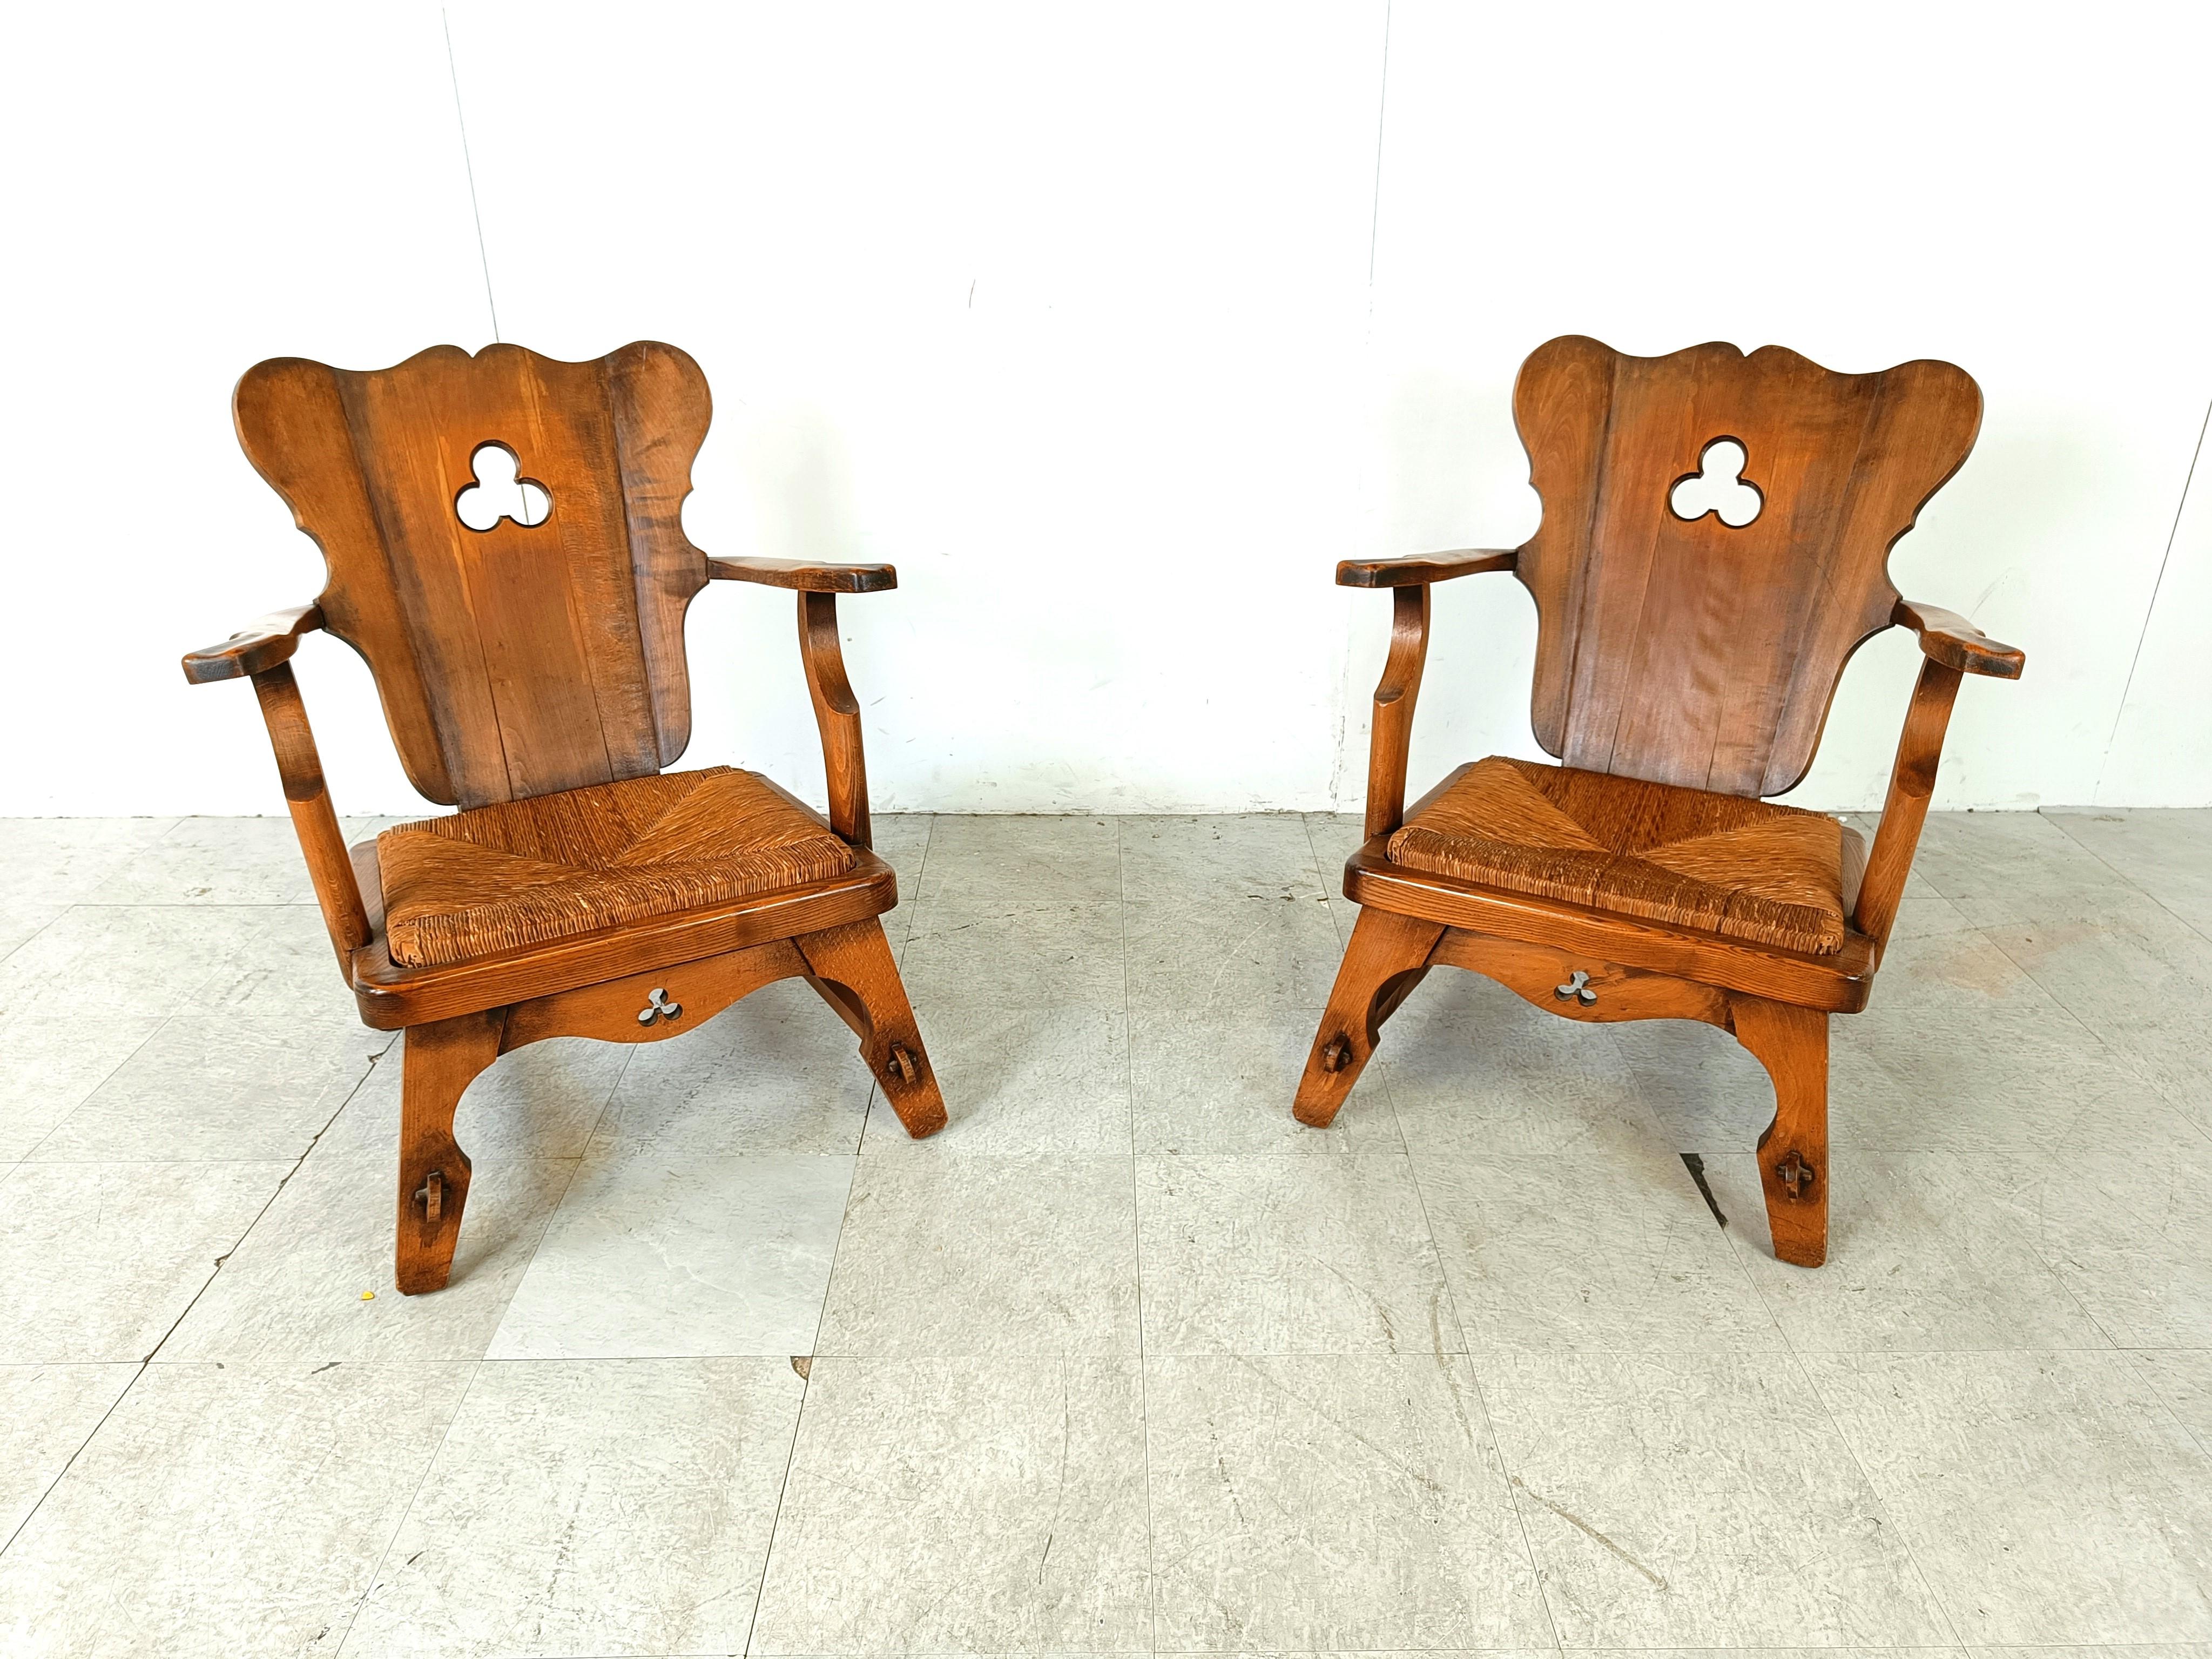 REQUEST A SHIPPING QUOTE BEFORE ORDERING, SHOWN RATES ARE ESTIMATES

Rustic carved wooden brutalist armchairs with wicker seats.

Good condition and very sturdy.

1960s - Belgium

Height: 80cm/37.40